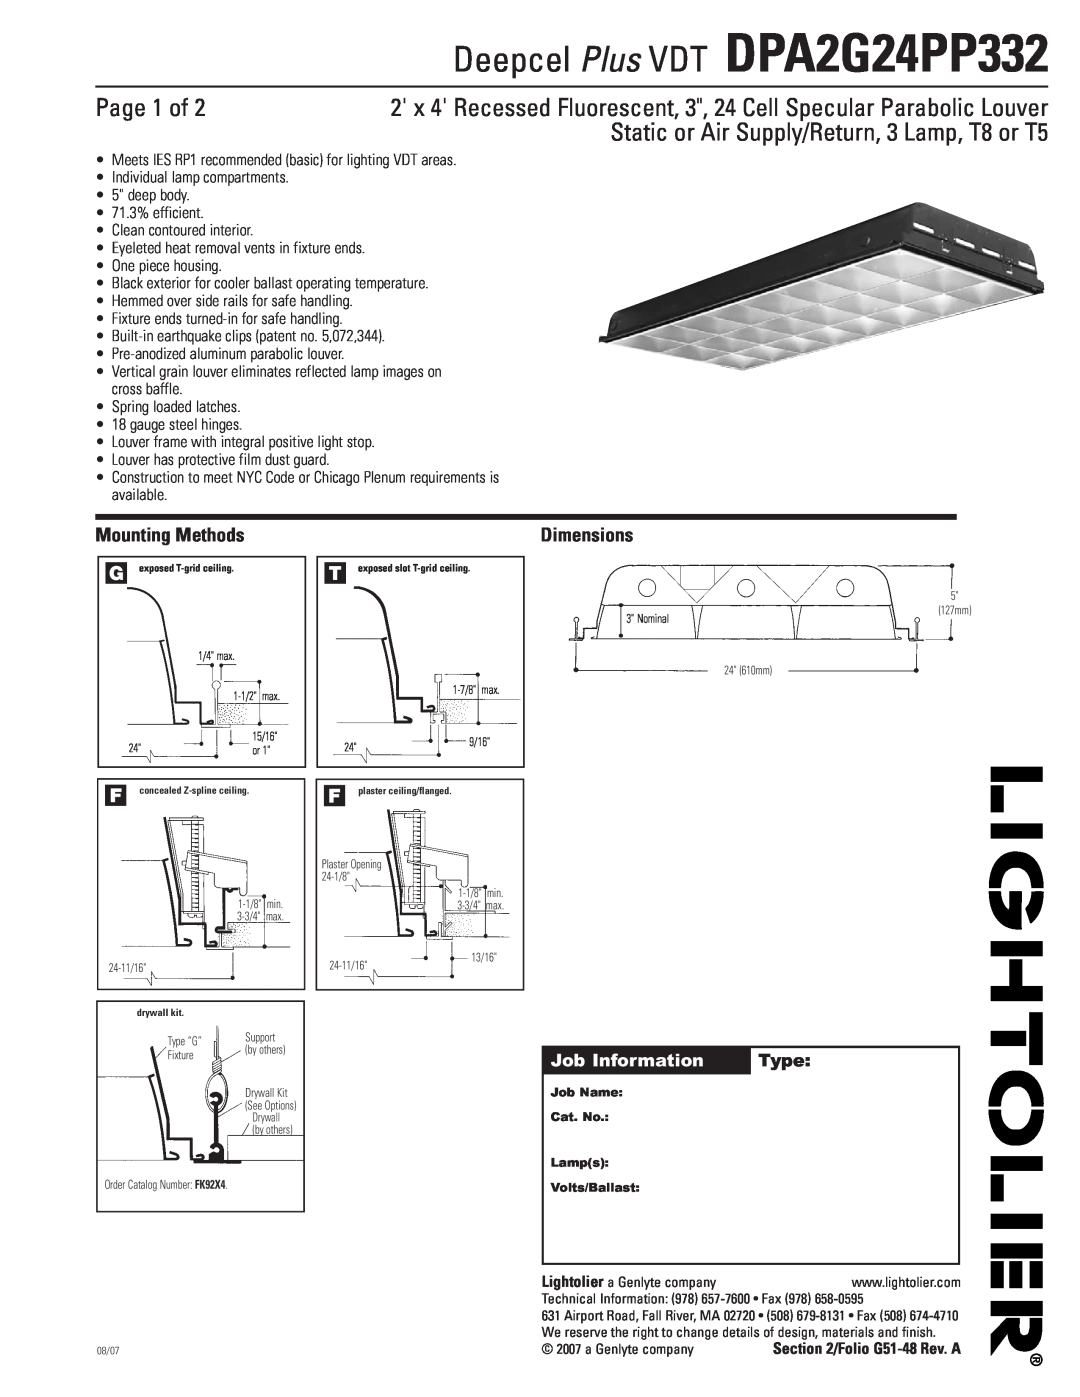 Lightolier dimensions Deepcel Plus VDT DPA2G24PP332, Page 1 of, Static or Air Supply/Return, 3 Lamp, T8 or T5, Type 